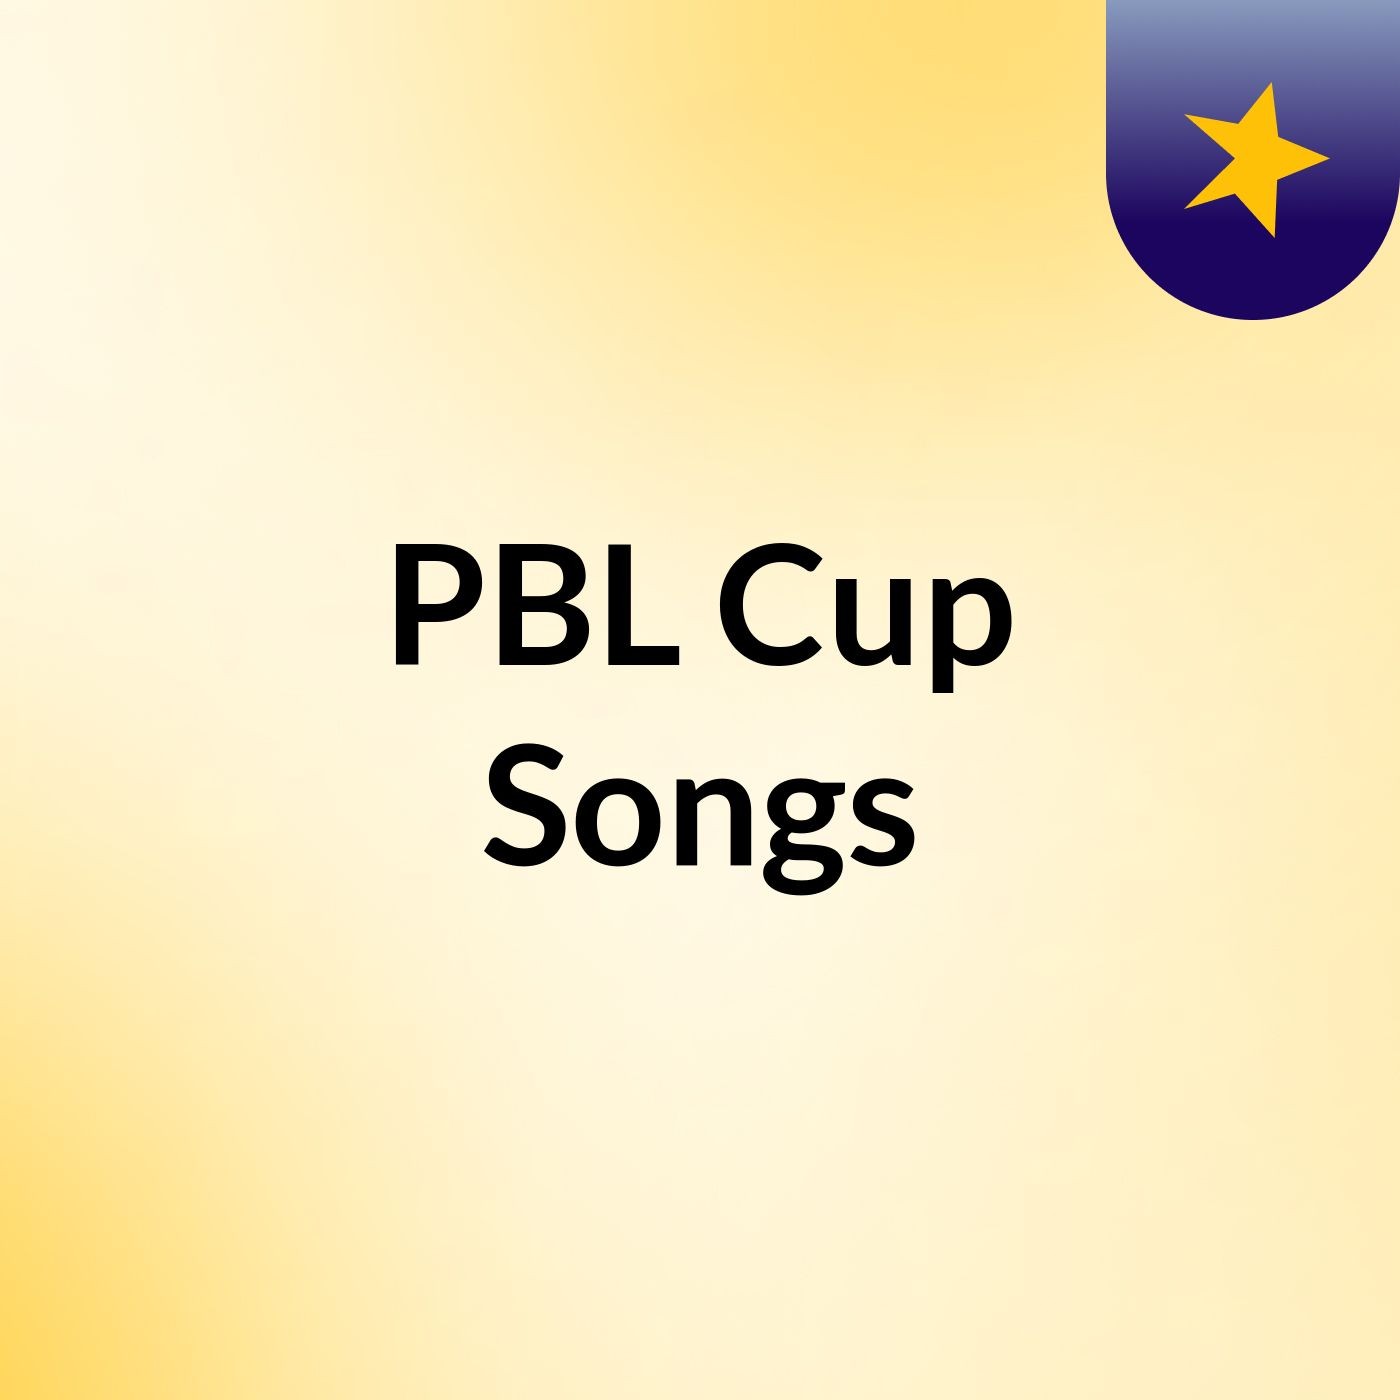 PBL Cup Songs